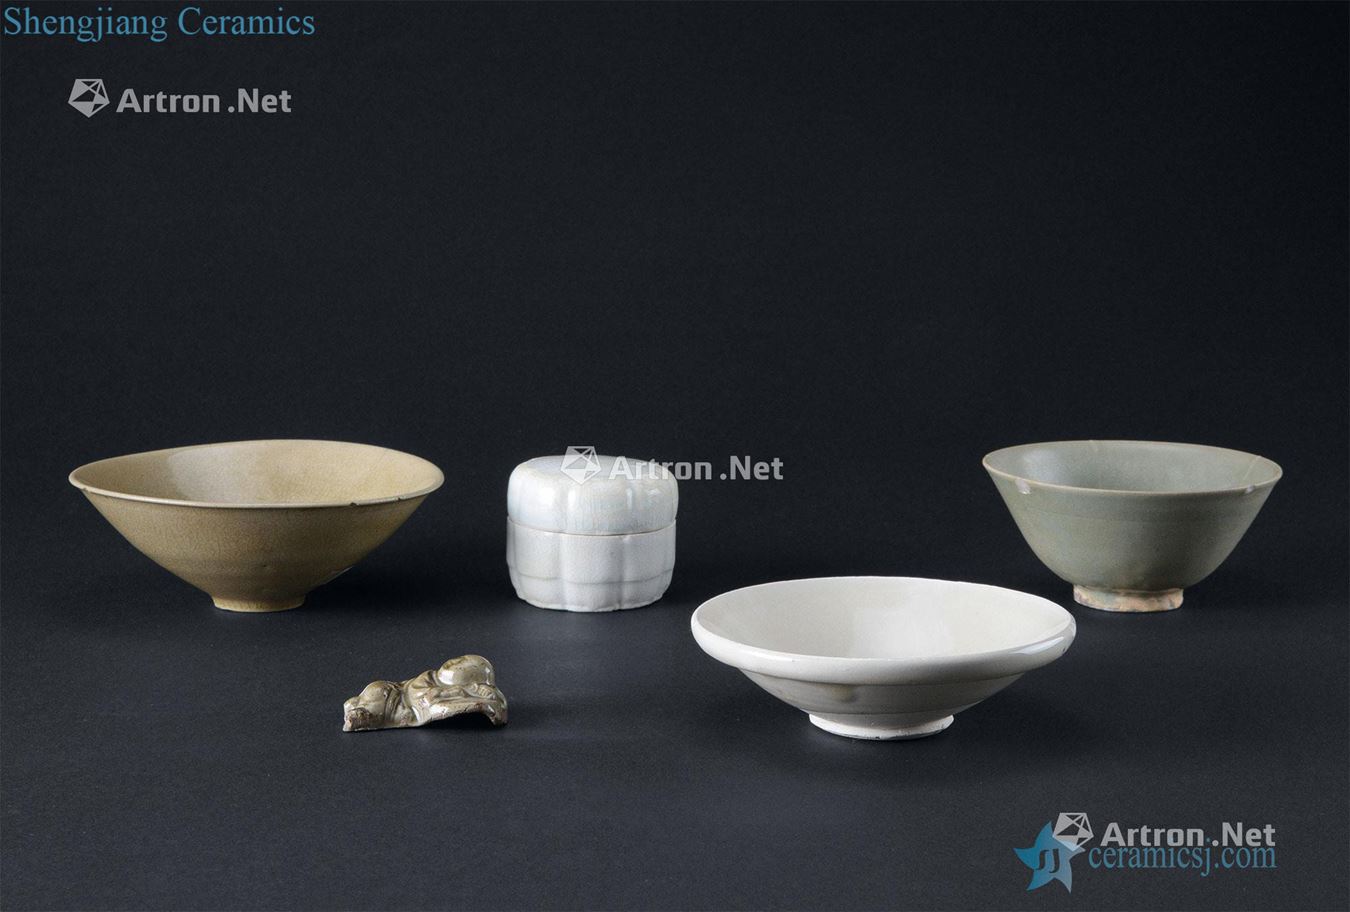 Tang - song dynasty (618-1279), white porcelain lamp Blue and white mouth sweet box Yao state kiln mouth bowl Celadon bowls Yao state kiln lad furnishing articles (five pieces a set)